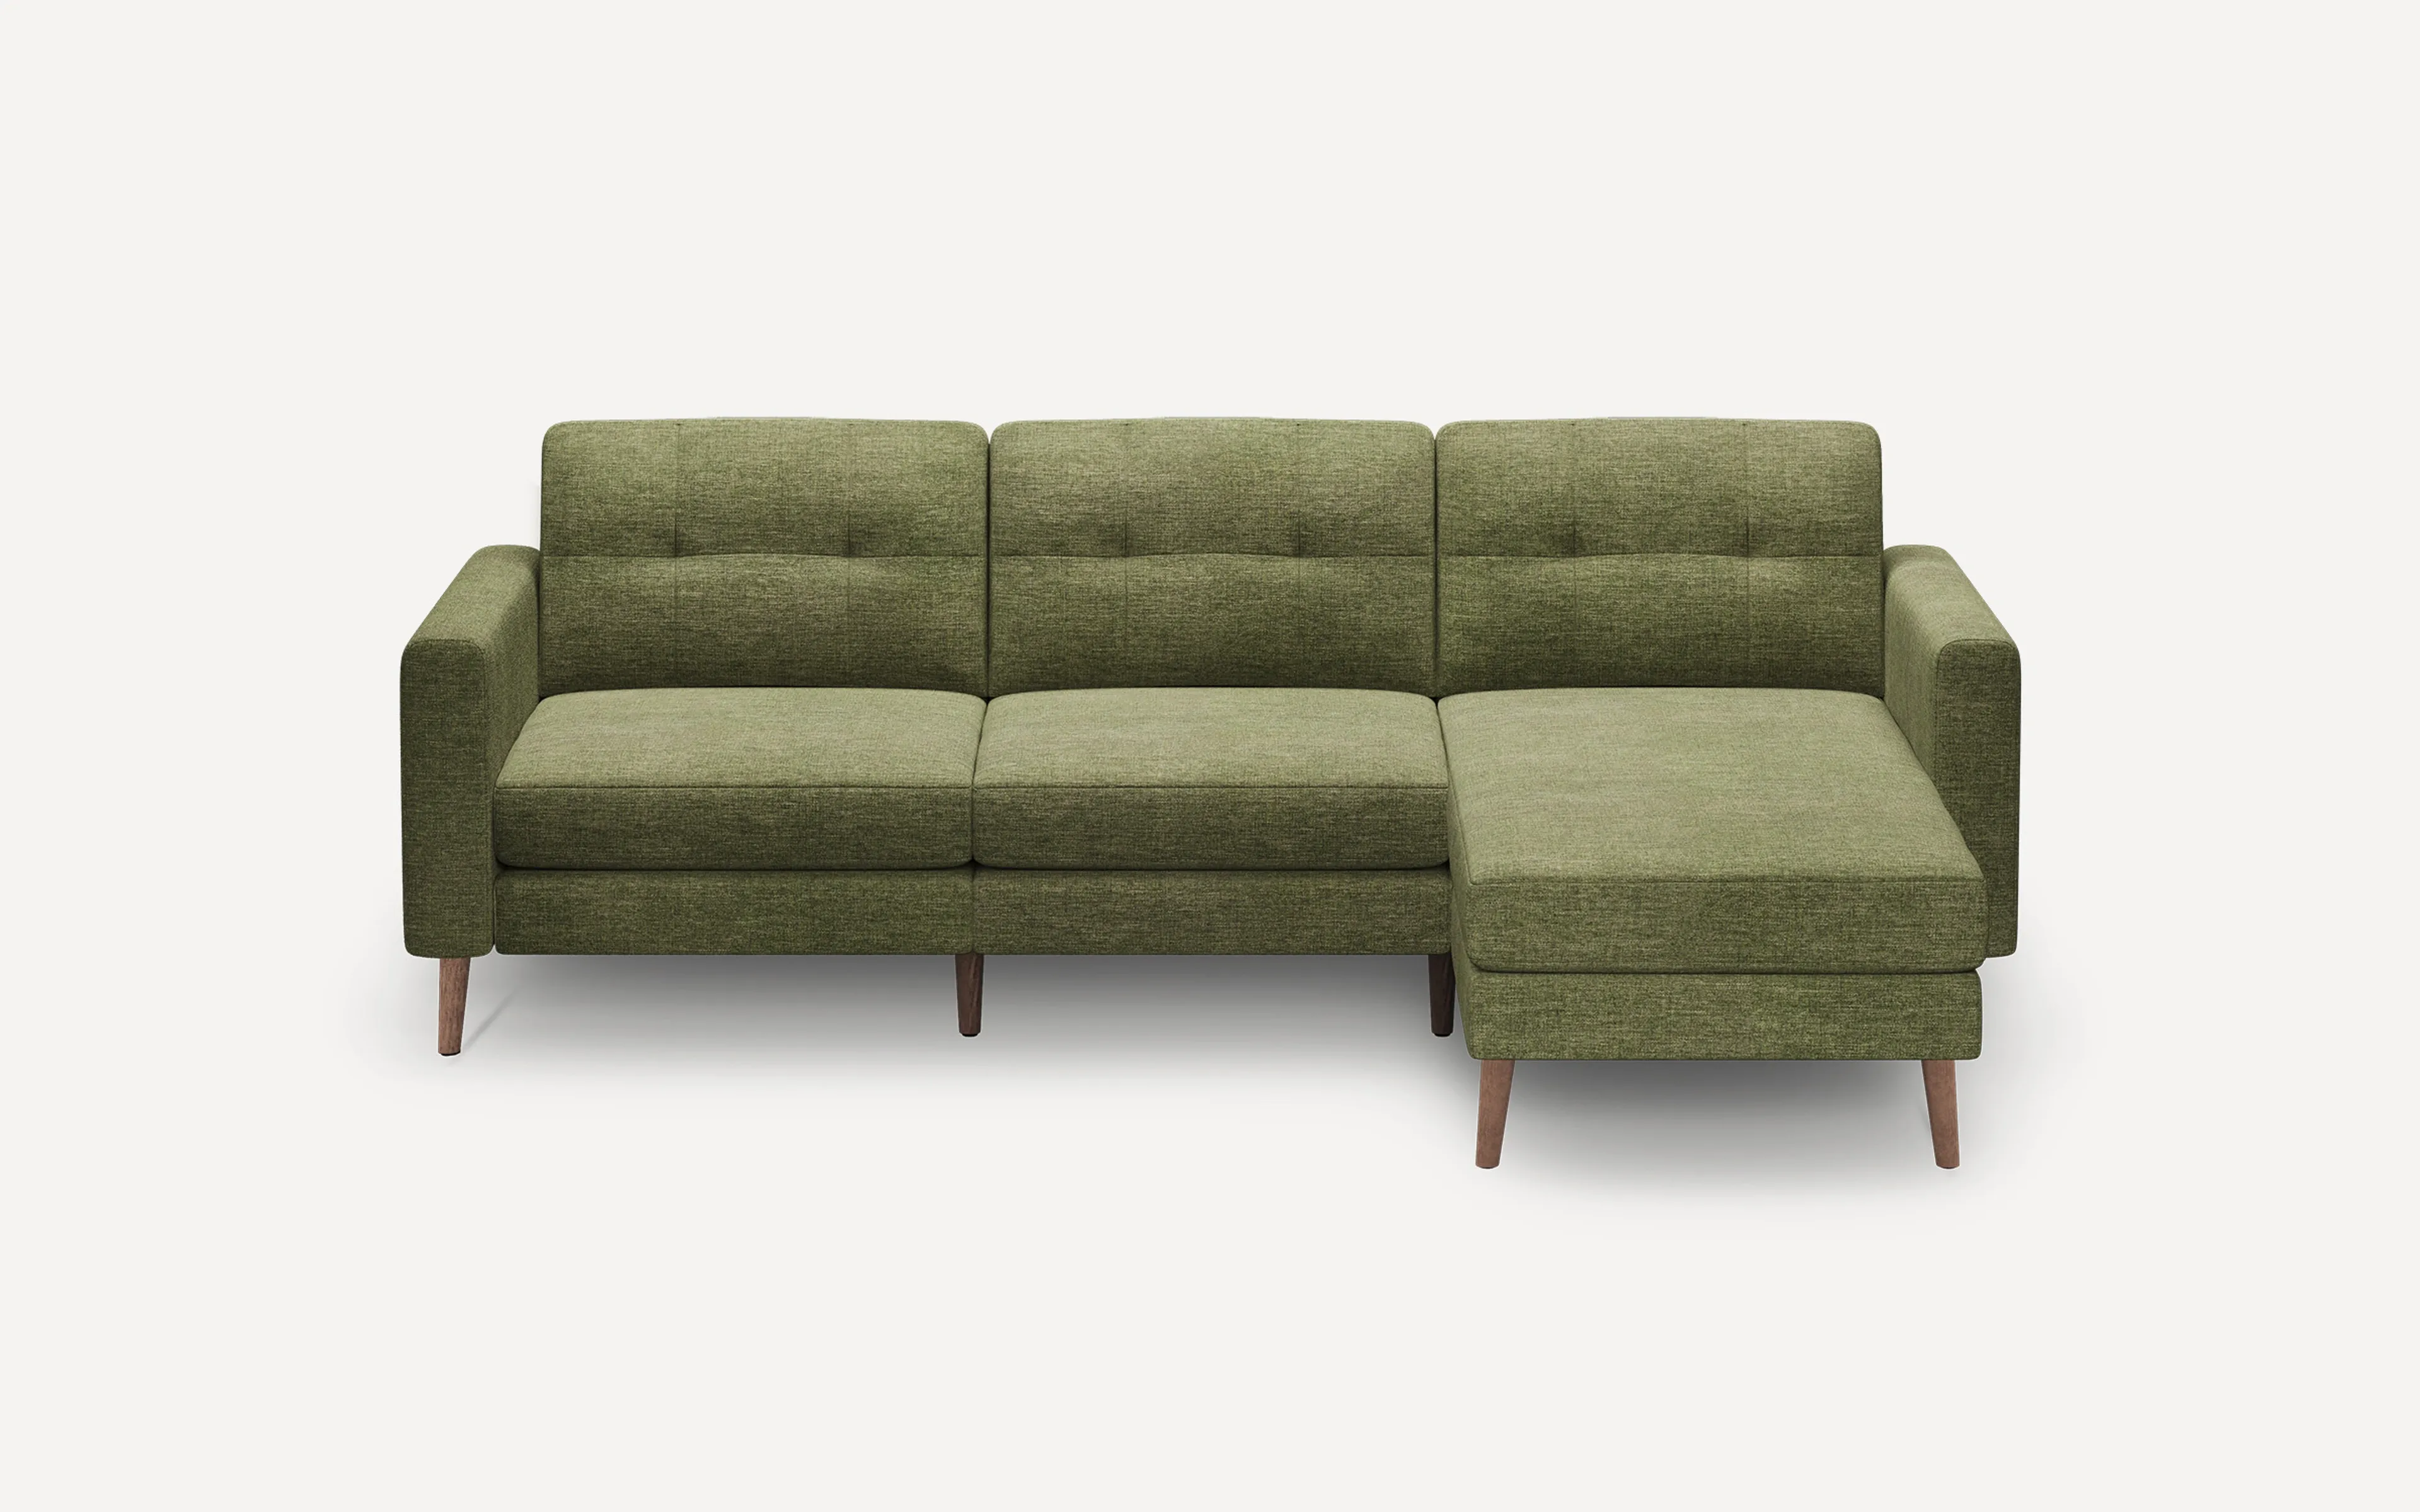 Original Nomad Chaise Sofa in Moss Green Fabric